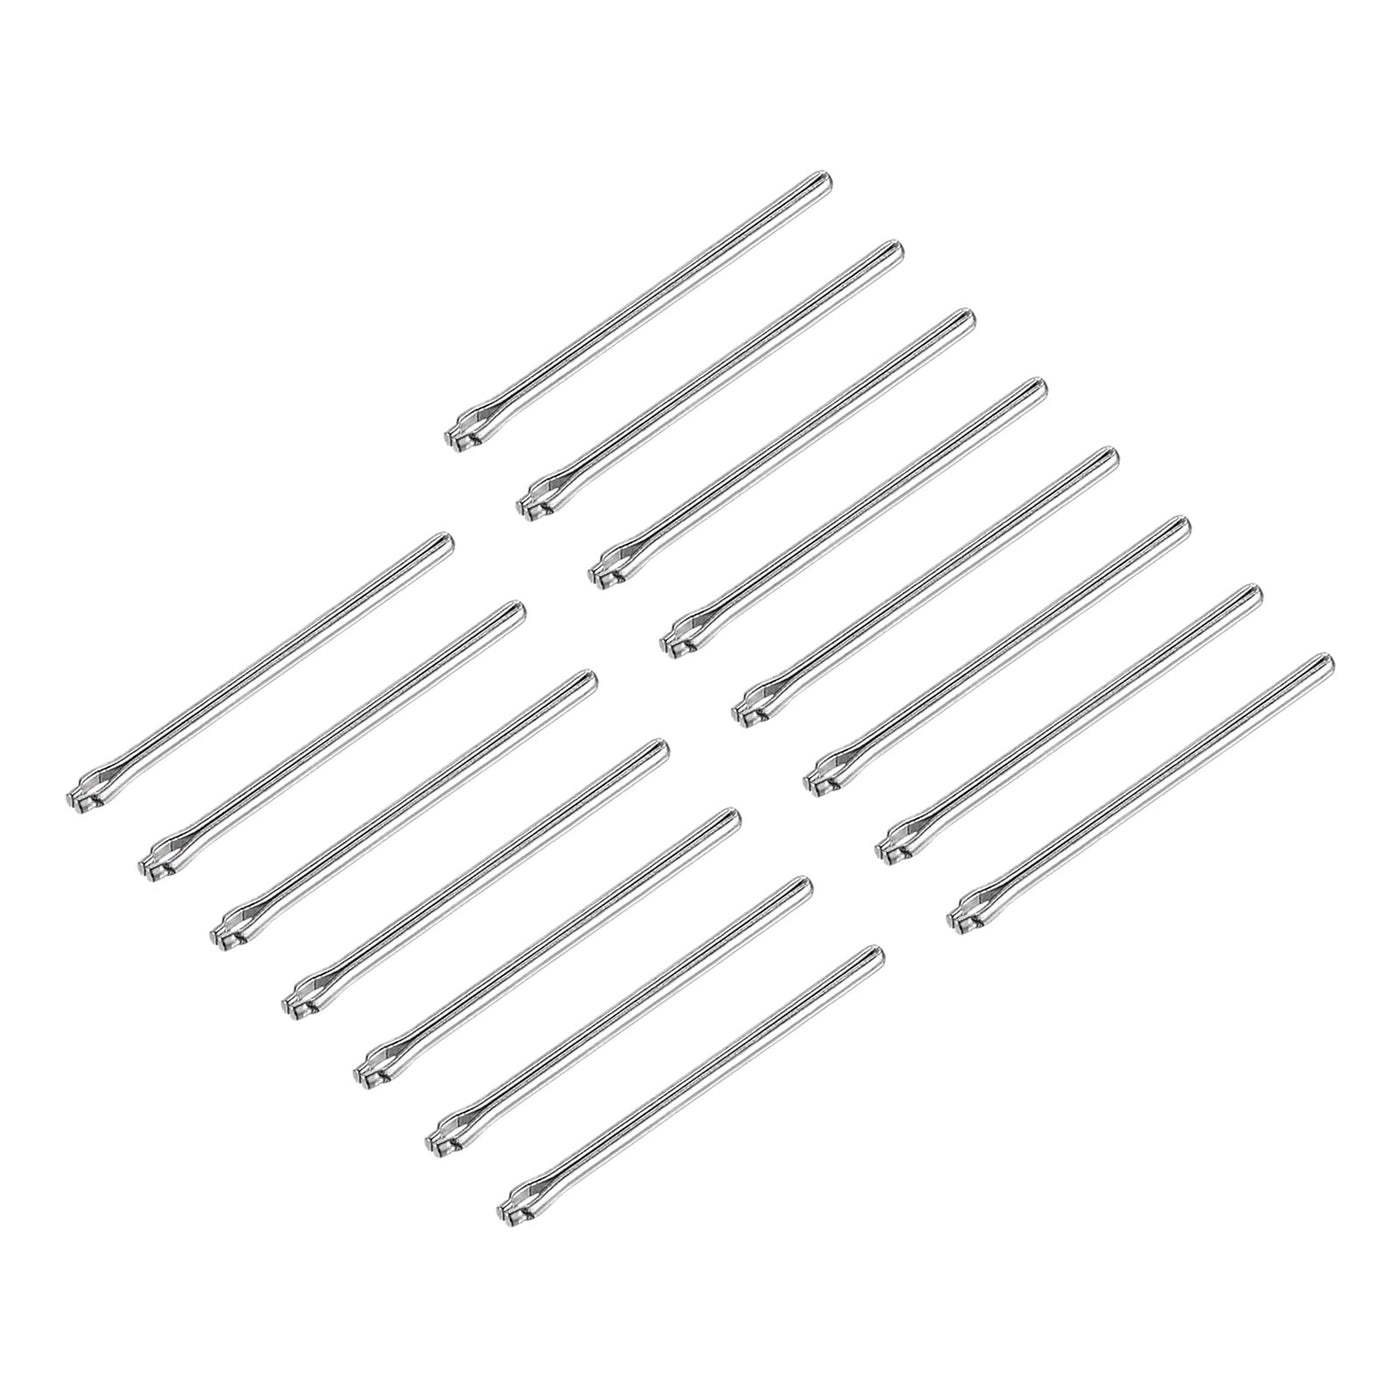 Uxcell Uxcell 15Pcs 18mm Watch Band Link Cotter Pin, Stainless Steel 0.8mm Dia. Silver Tone